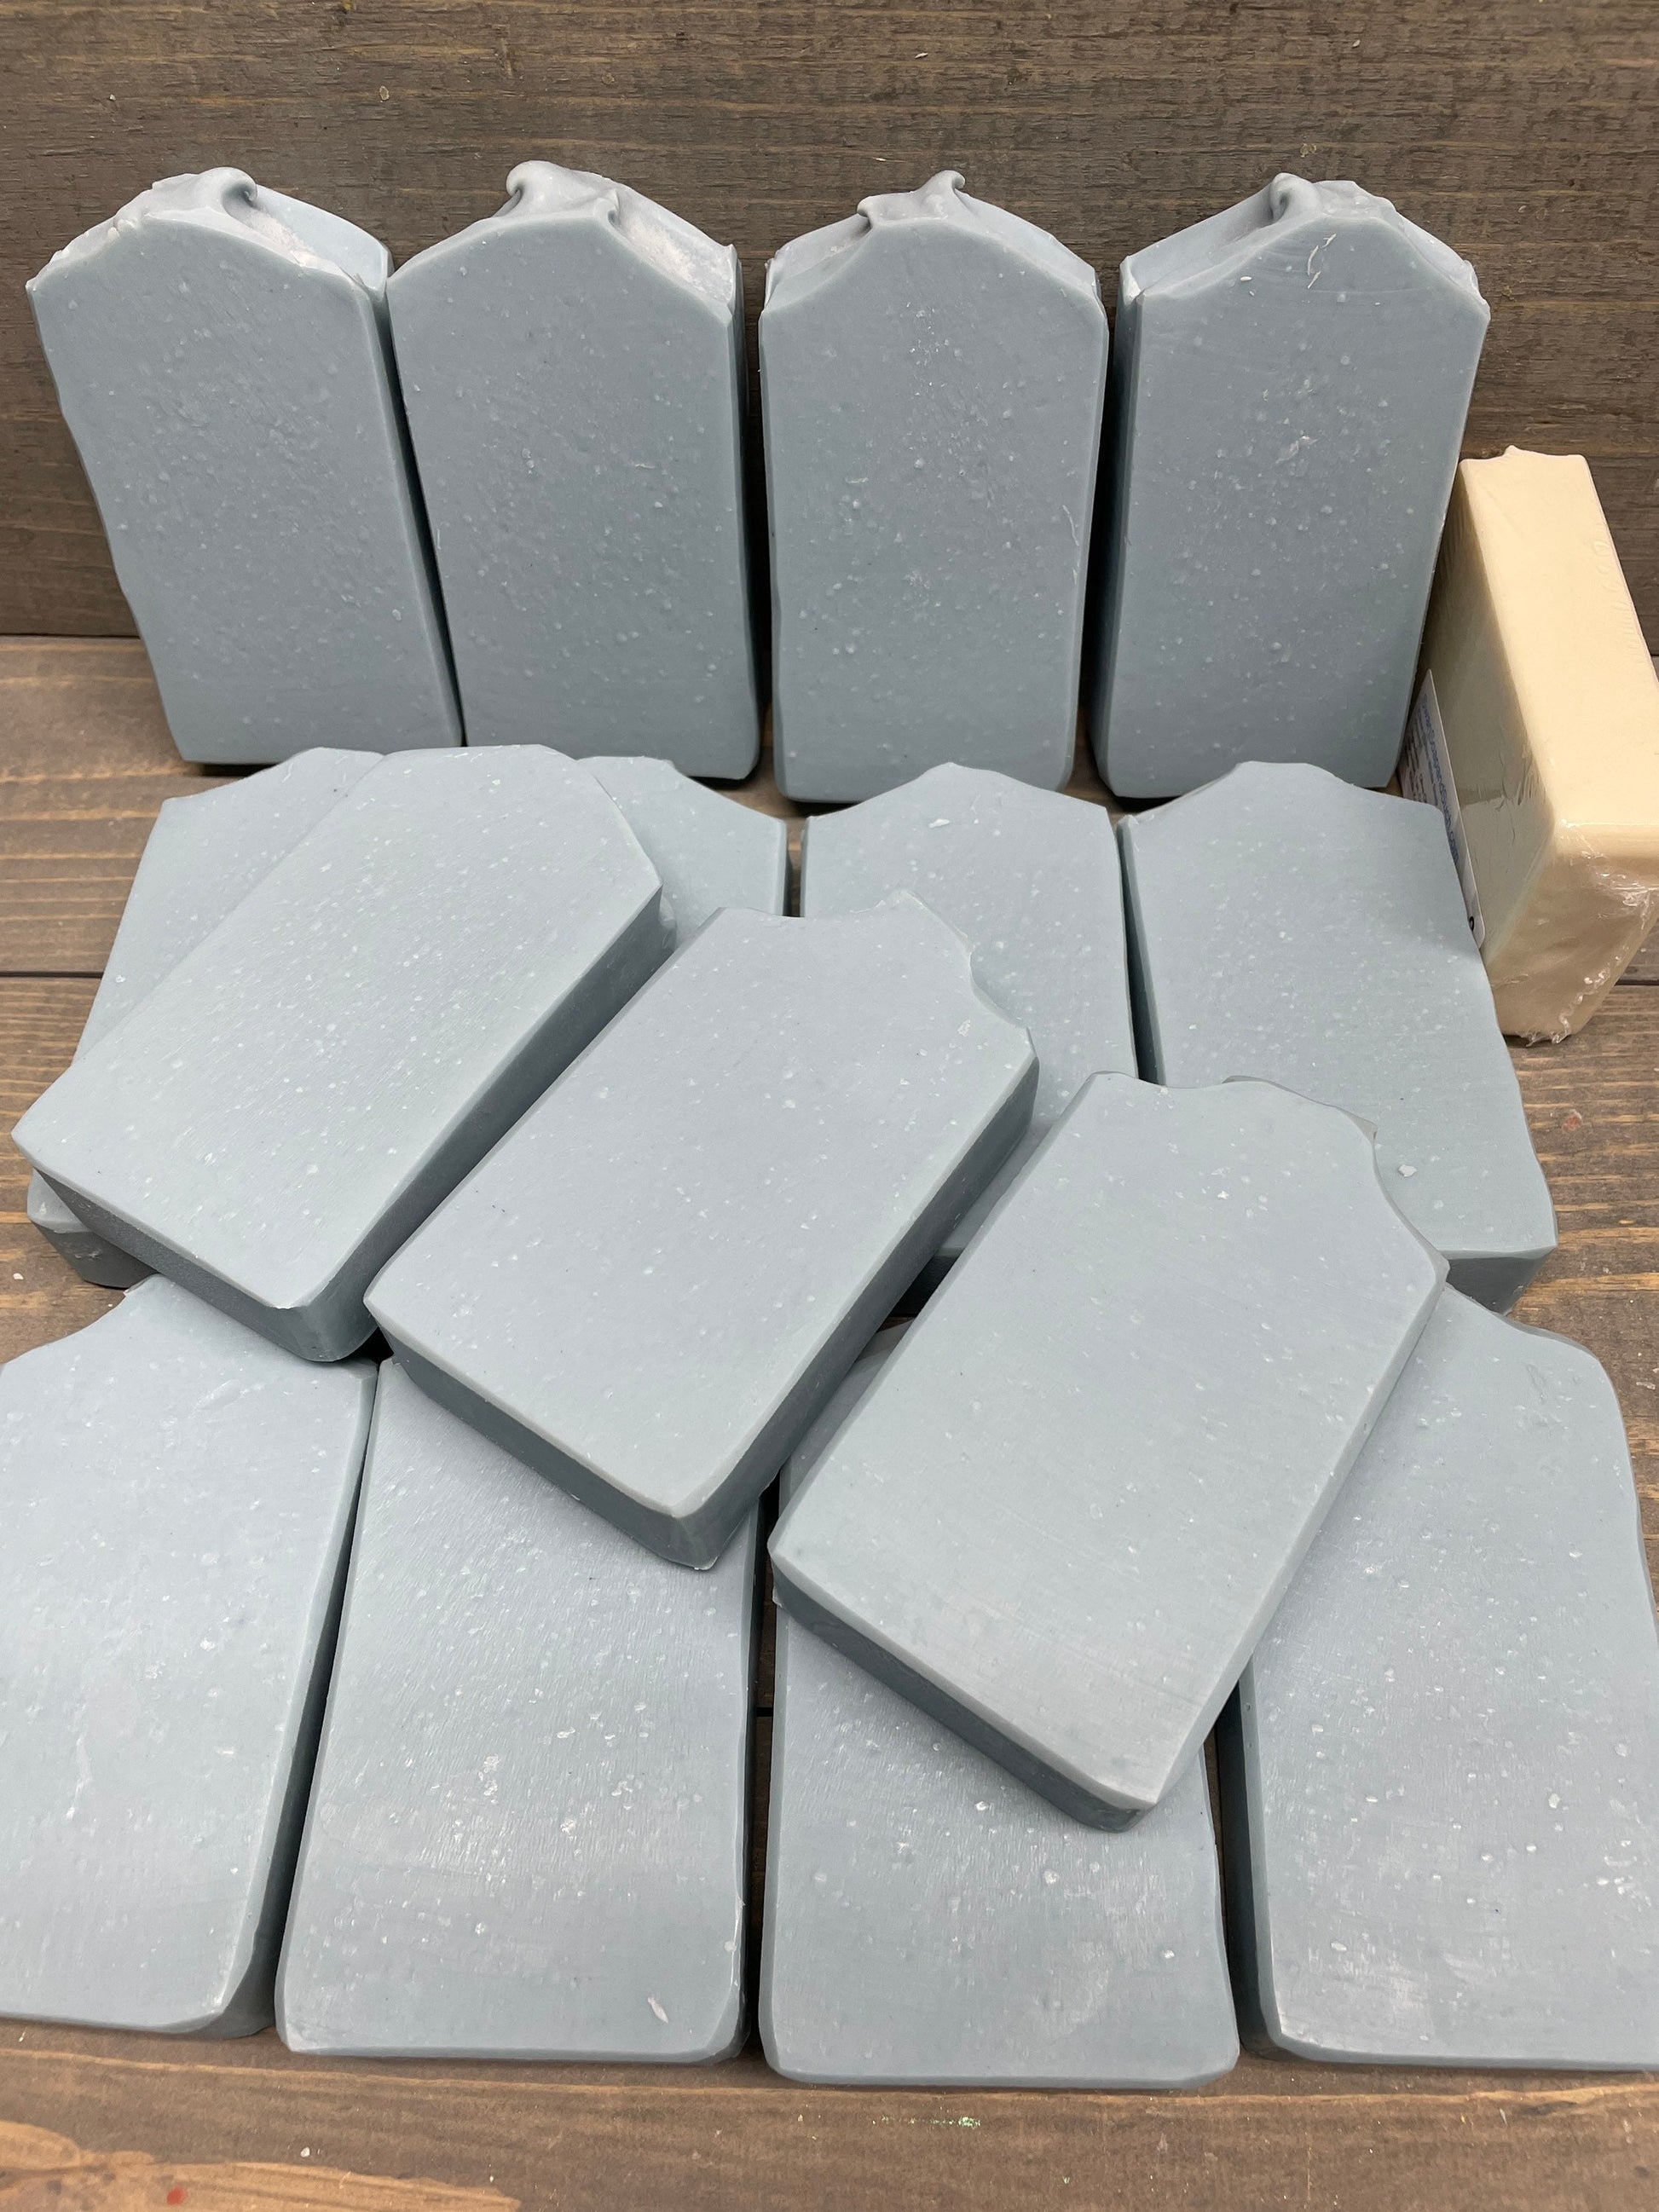 A photo of Clean Cotton Soap in BLUE CLAY- 5.0 oz. Bar Soap